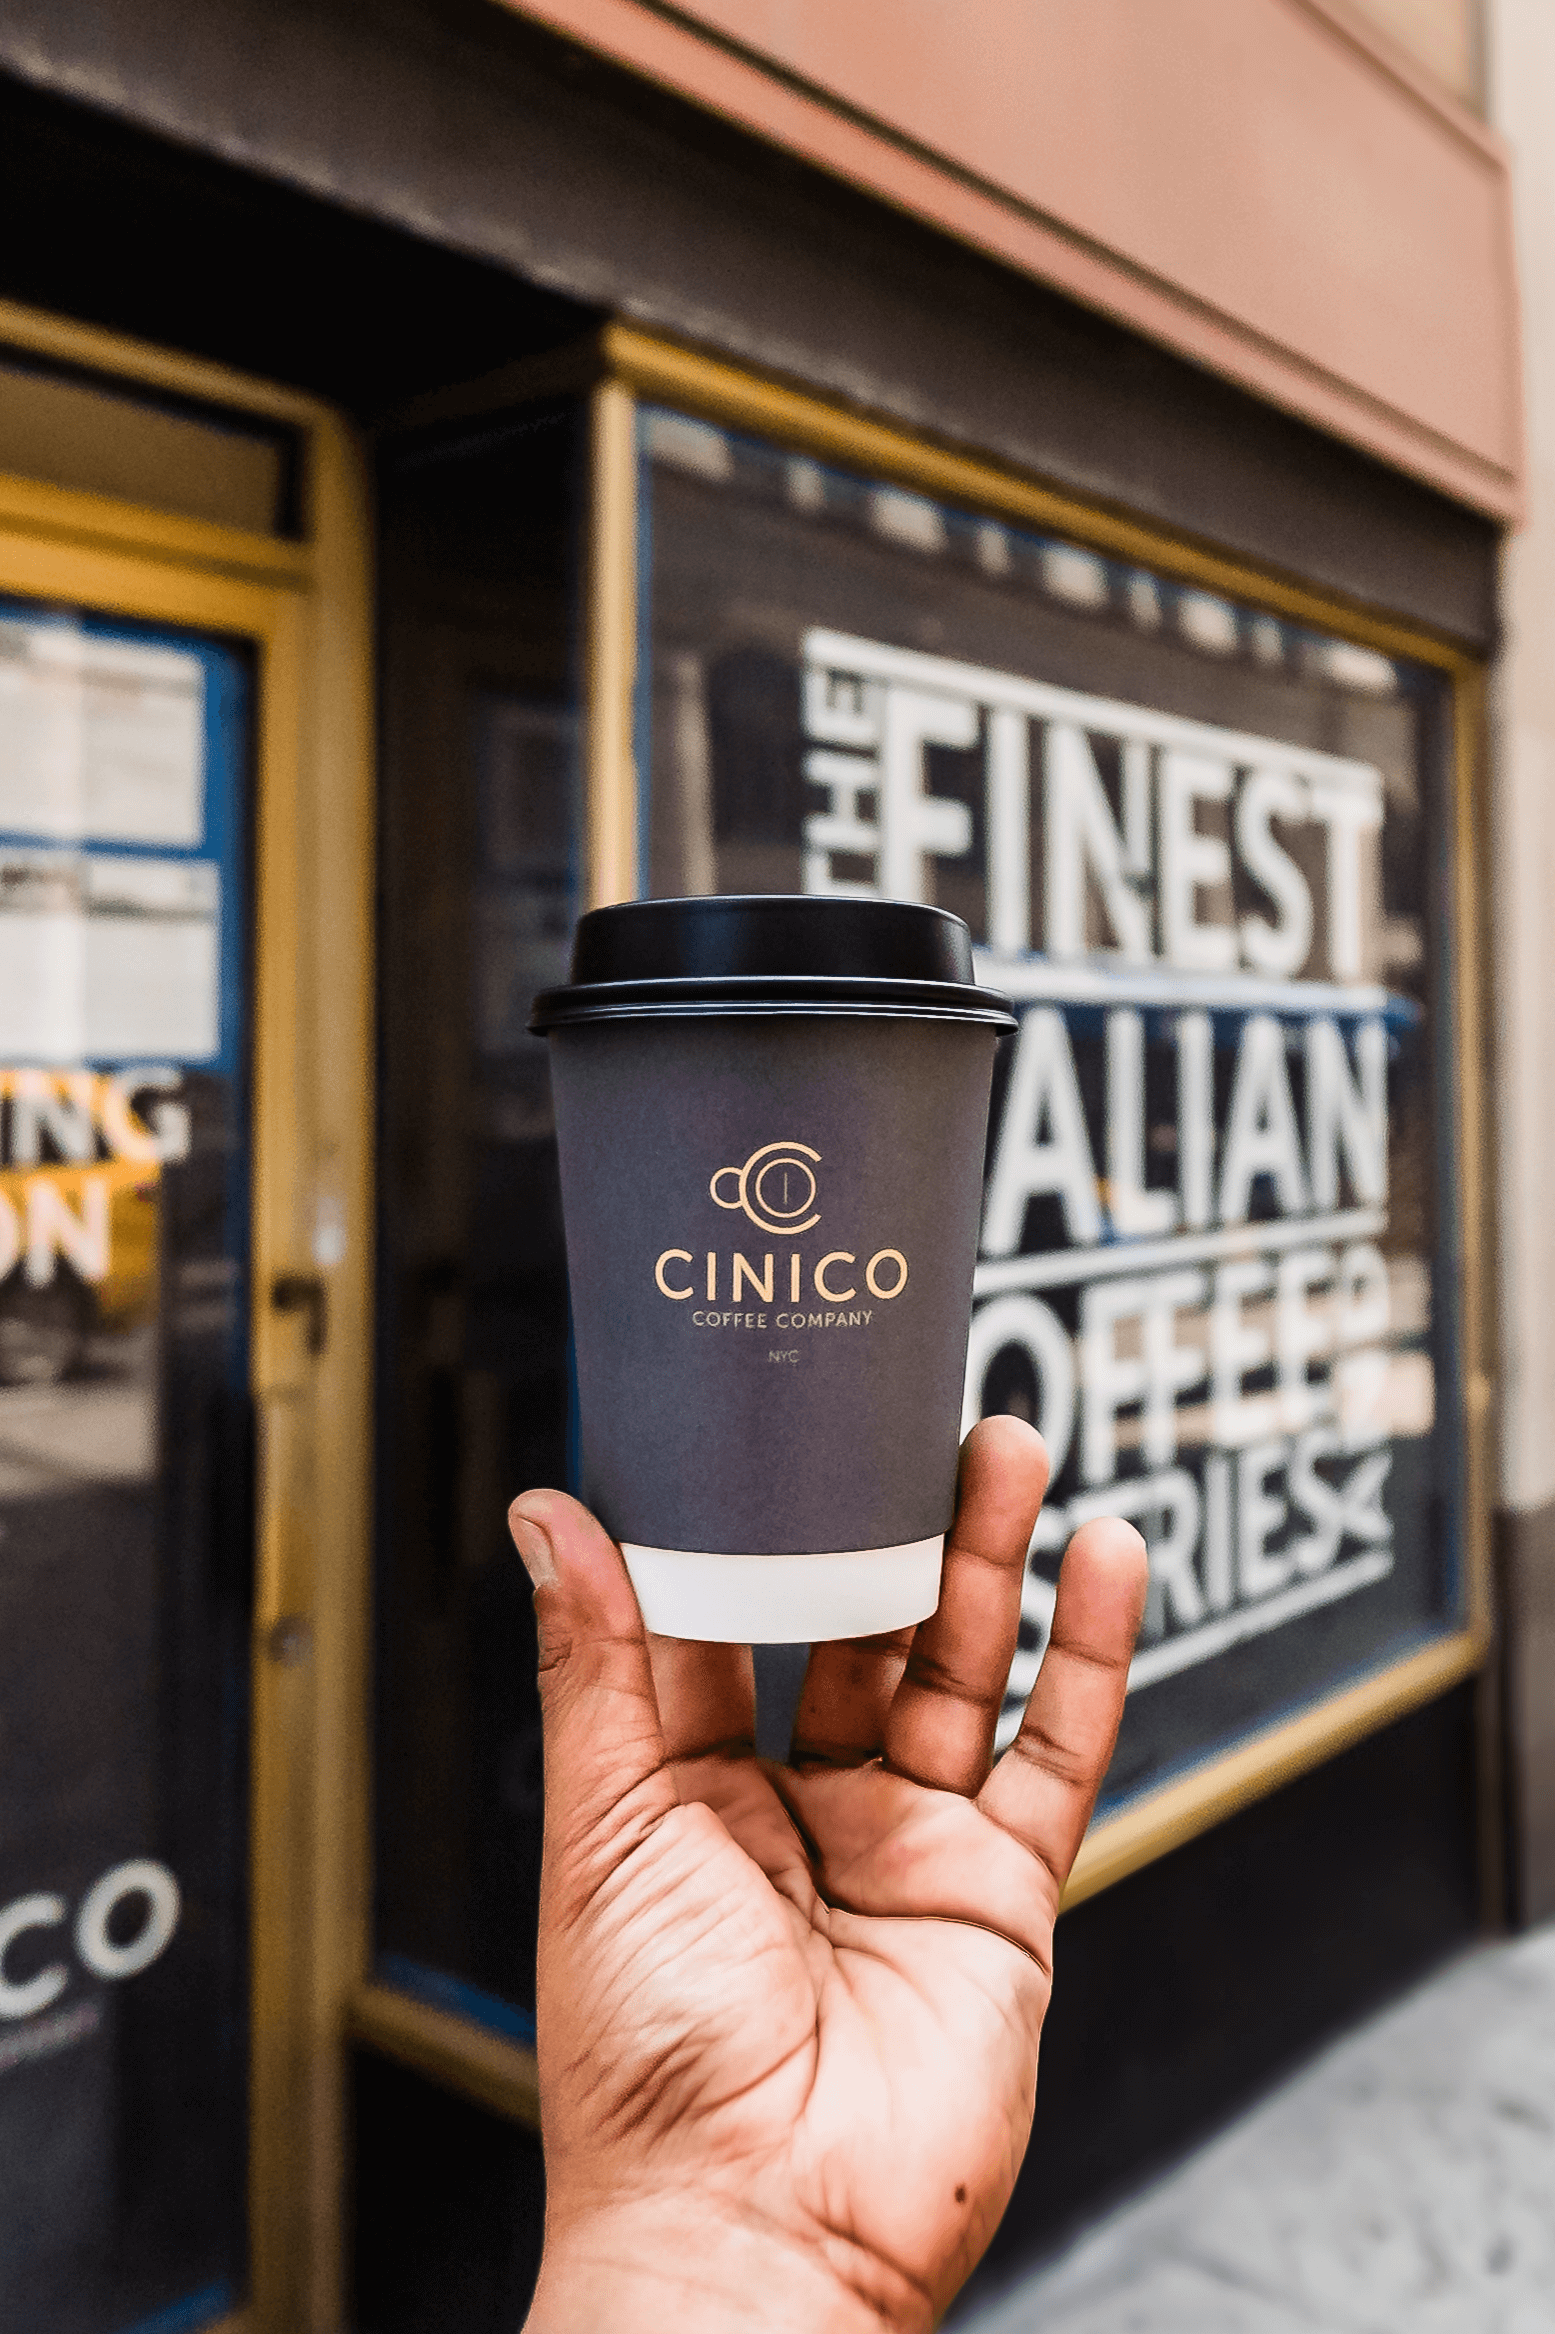 CINICO Coffee Company opens first New York City location in